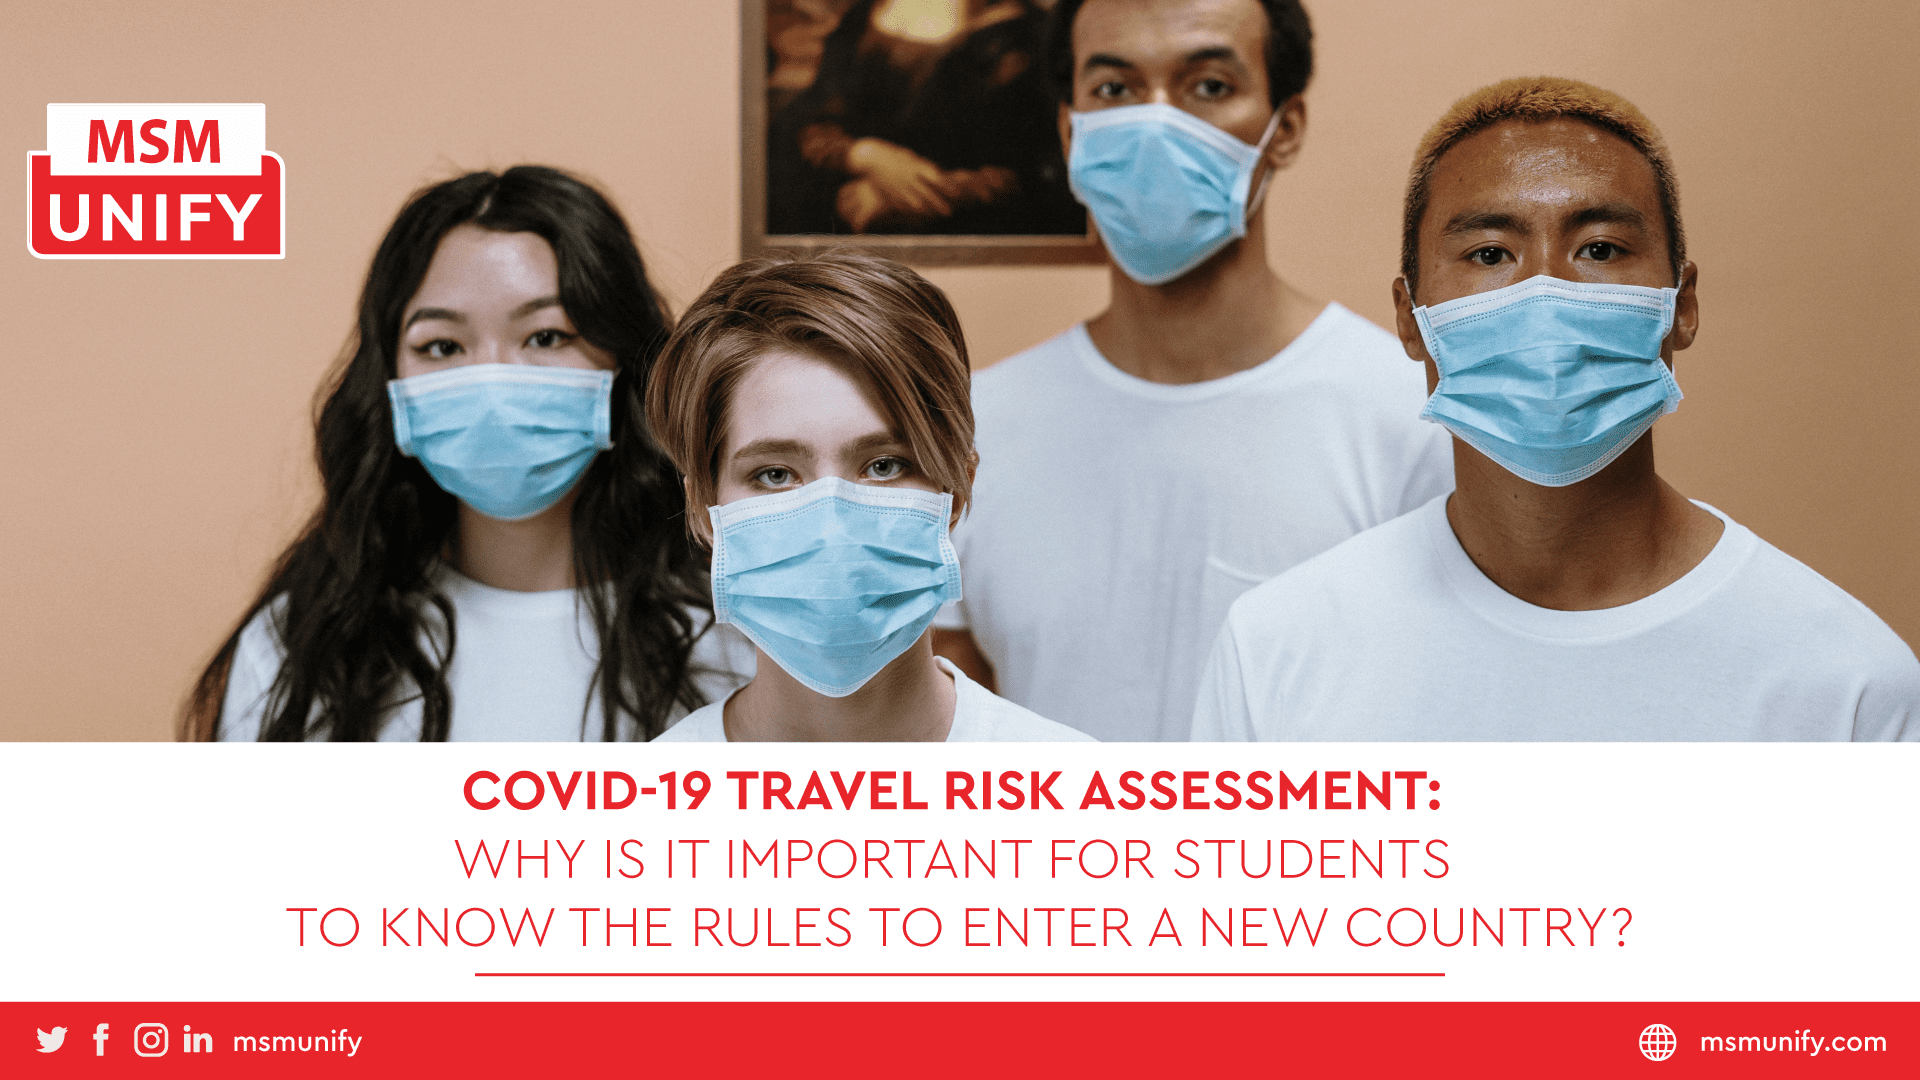 101921 MSM Unify COVID19 Travel Risk Assessment Why Its Important Now for Students REV01